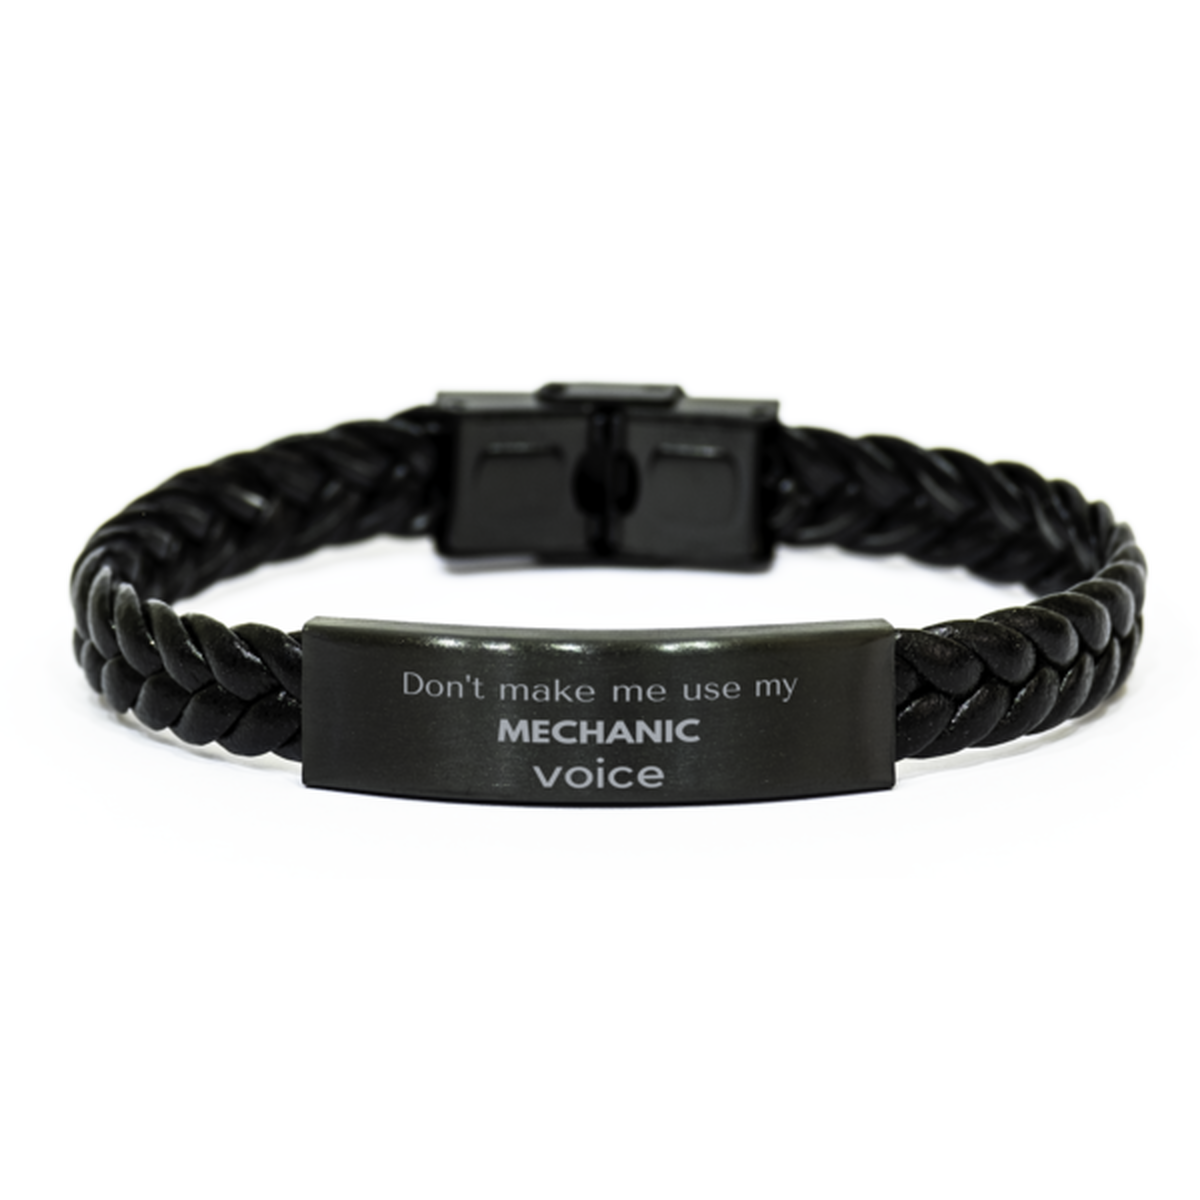 Don't make me use my Mechanic voice, Sarcasm Mechanic Gifts, Christmas Mechanic Braided Leather Bracelet Birthday Unique Gifts For Mechanic Coworkers, Men, Women, Colleague, Friends